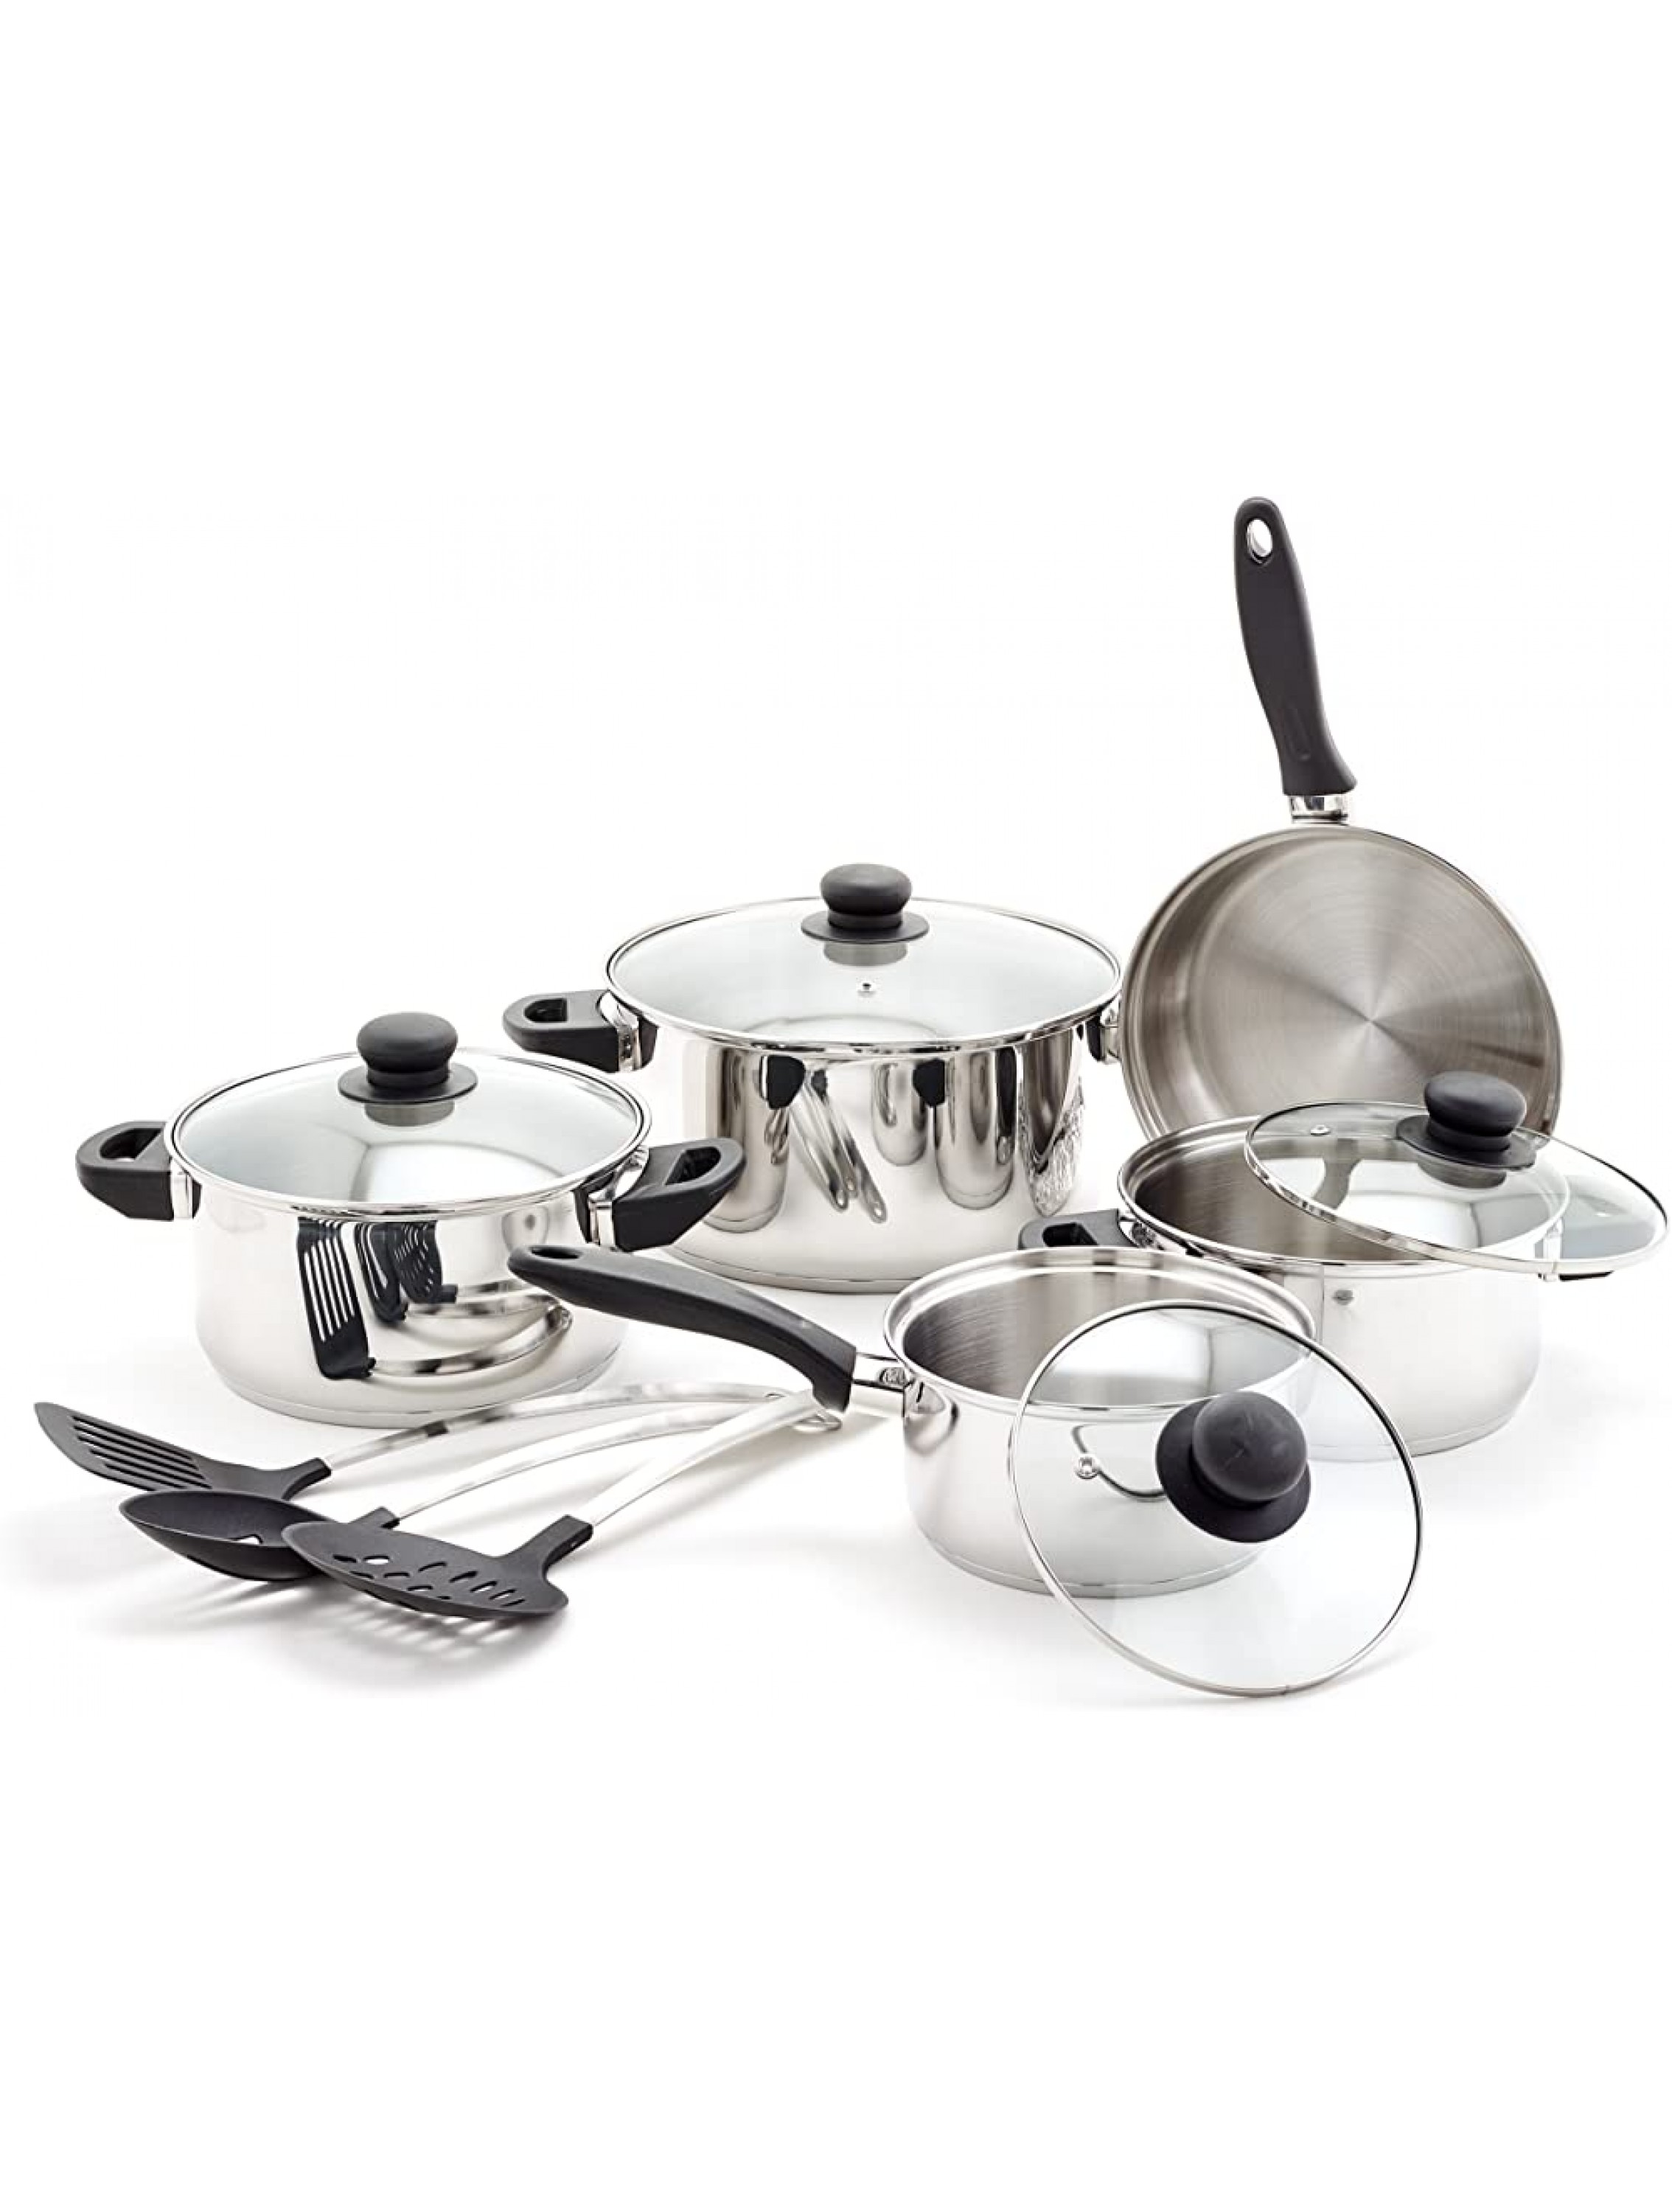 Old Dutch 1515 12 Pc Stainless Steel Kitchen Tools Cookware Sets Black - BON5E4SKS